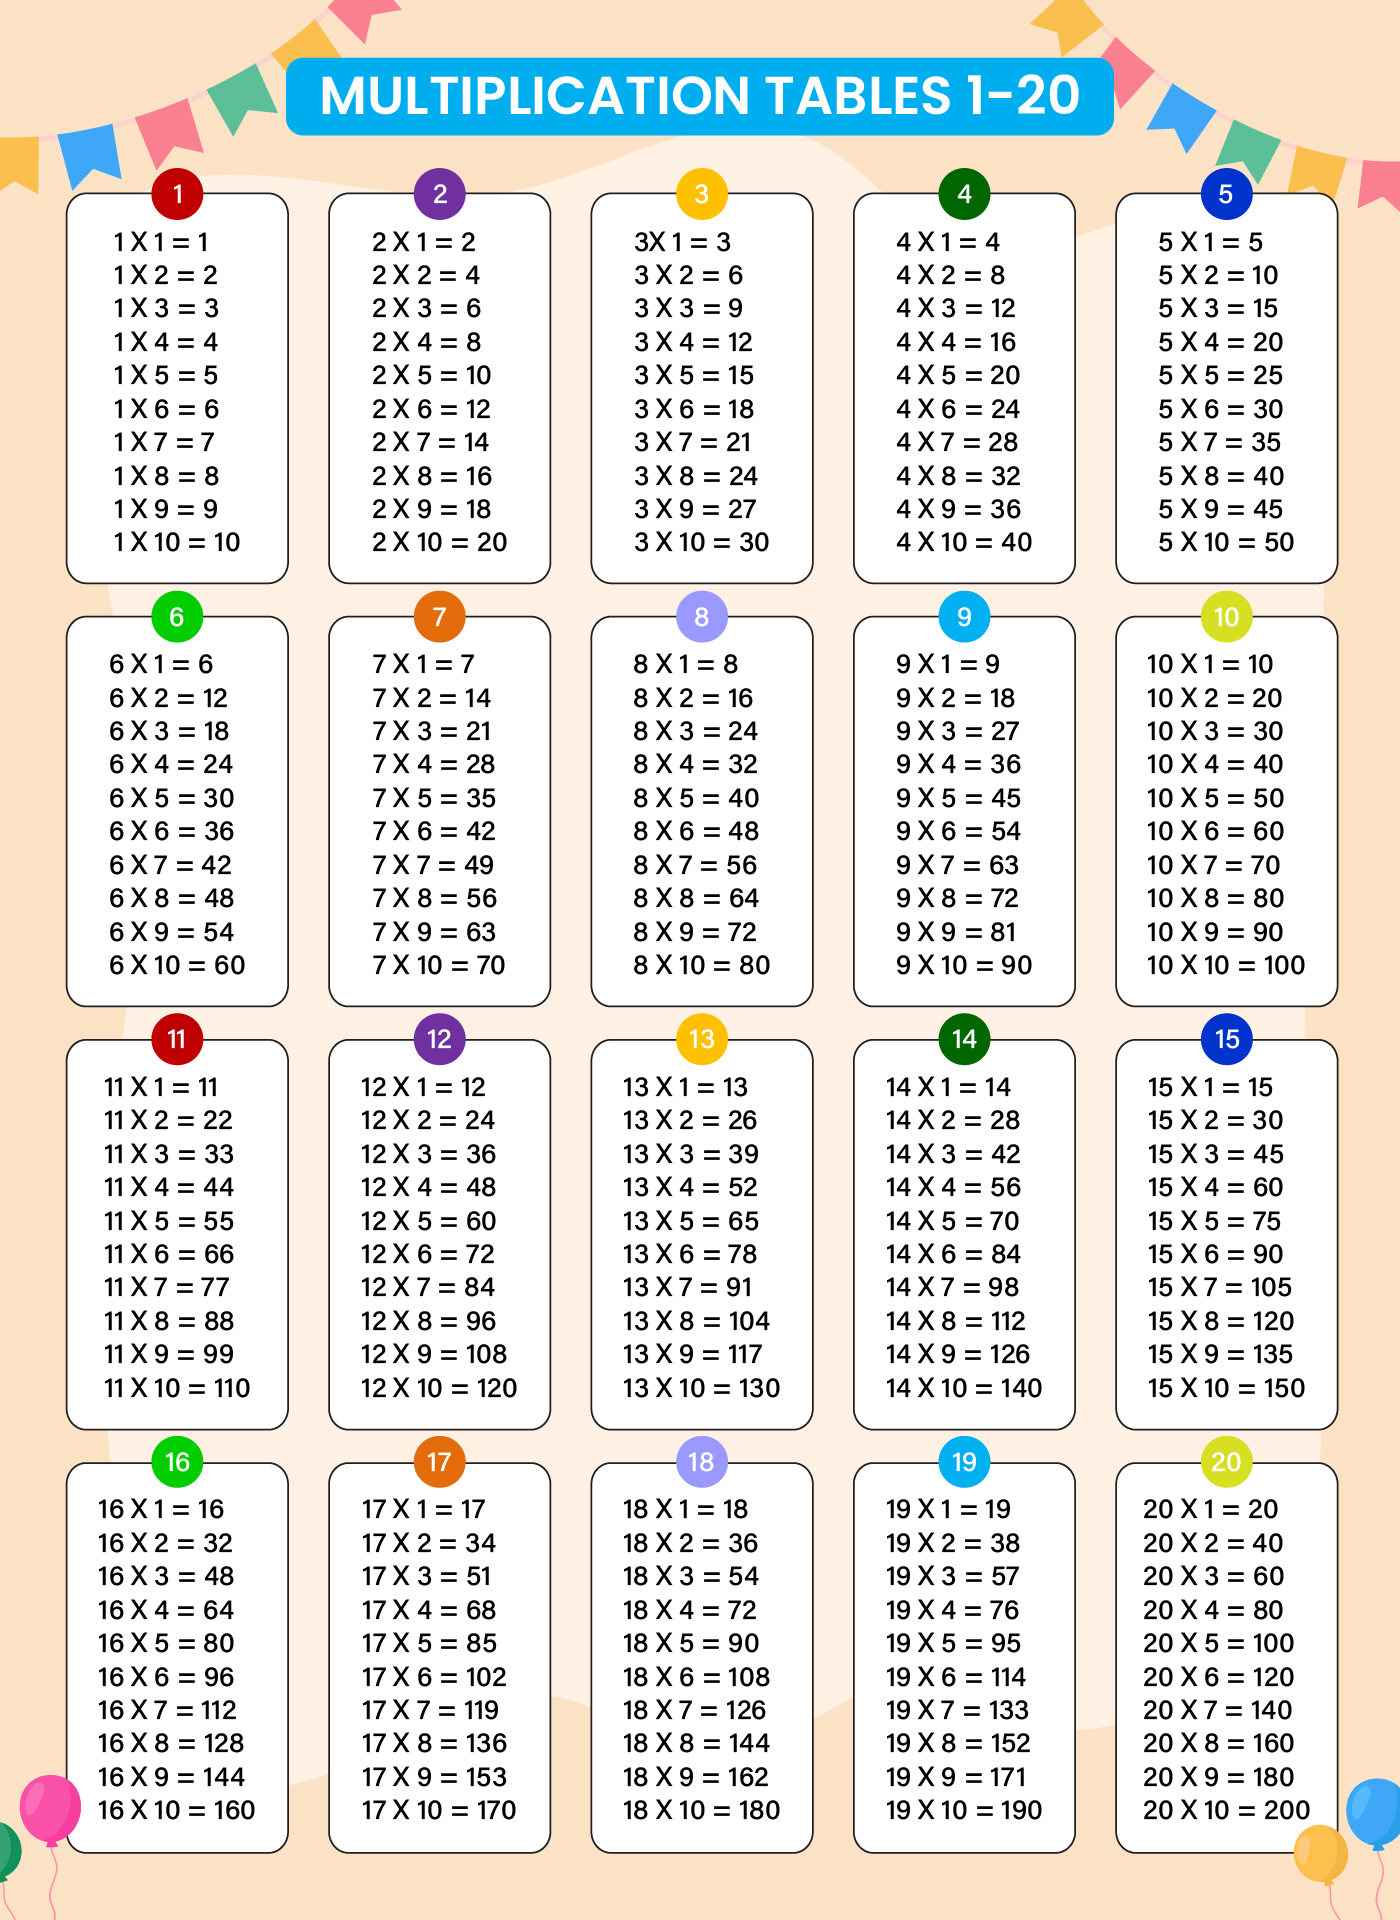 printable-colorful-multiplication-table-sexiezpicz-web-porn